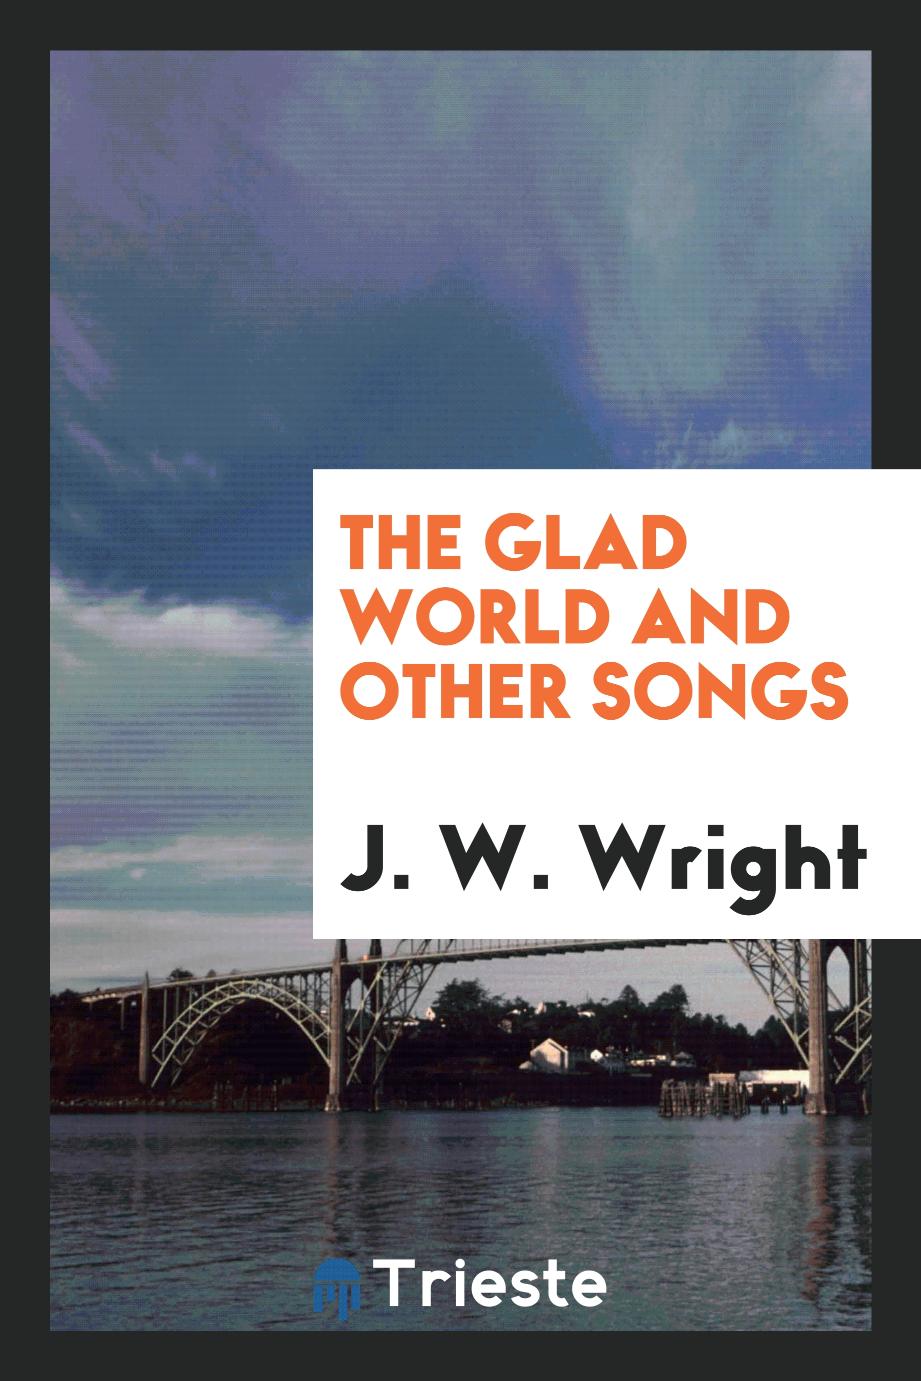 The Glad World and Other Songs